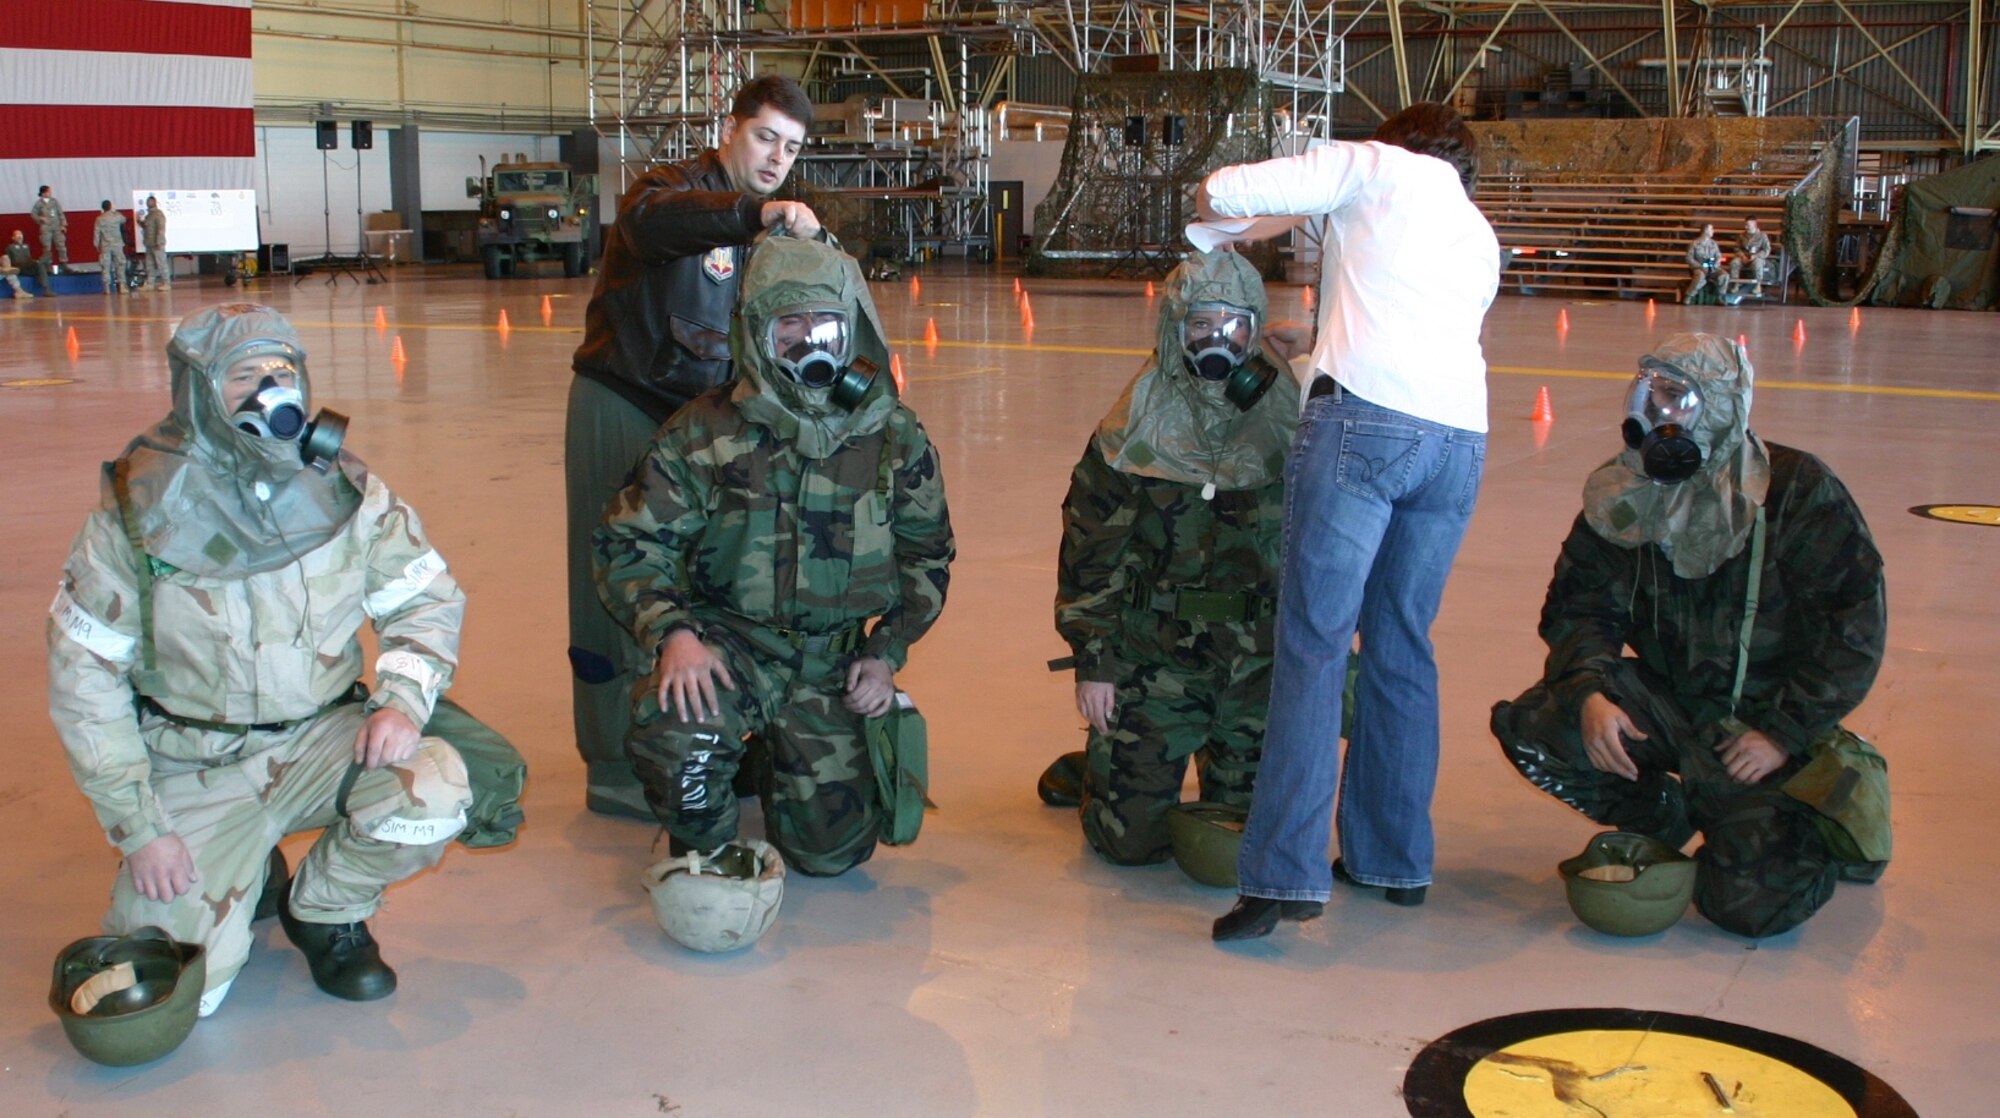 A team is inspected at the Gas Mask ROE challenge at the ATSO Rodeo Jan 30.